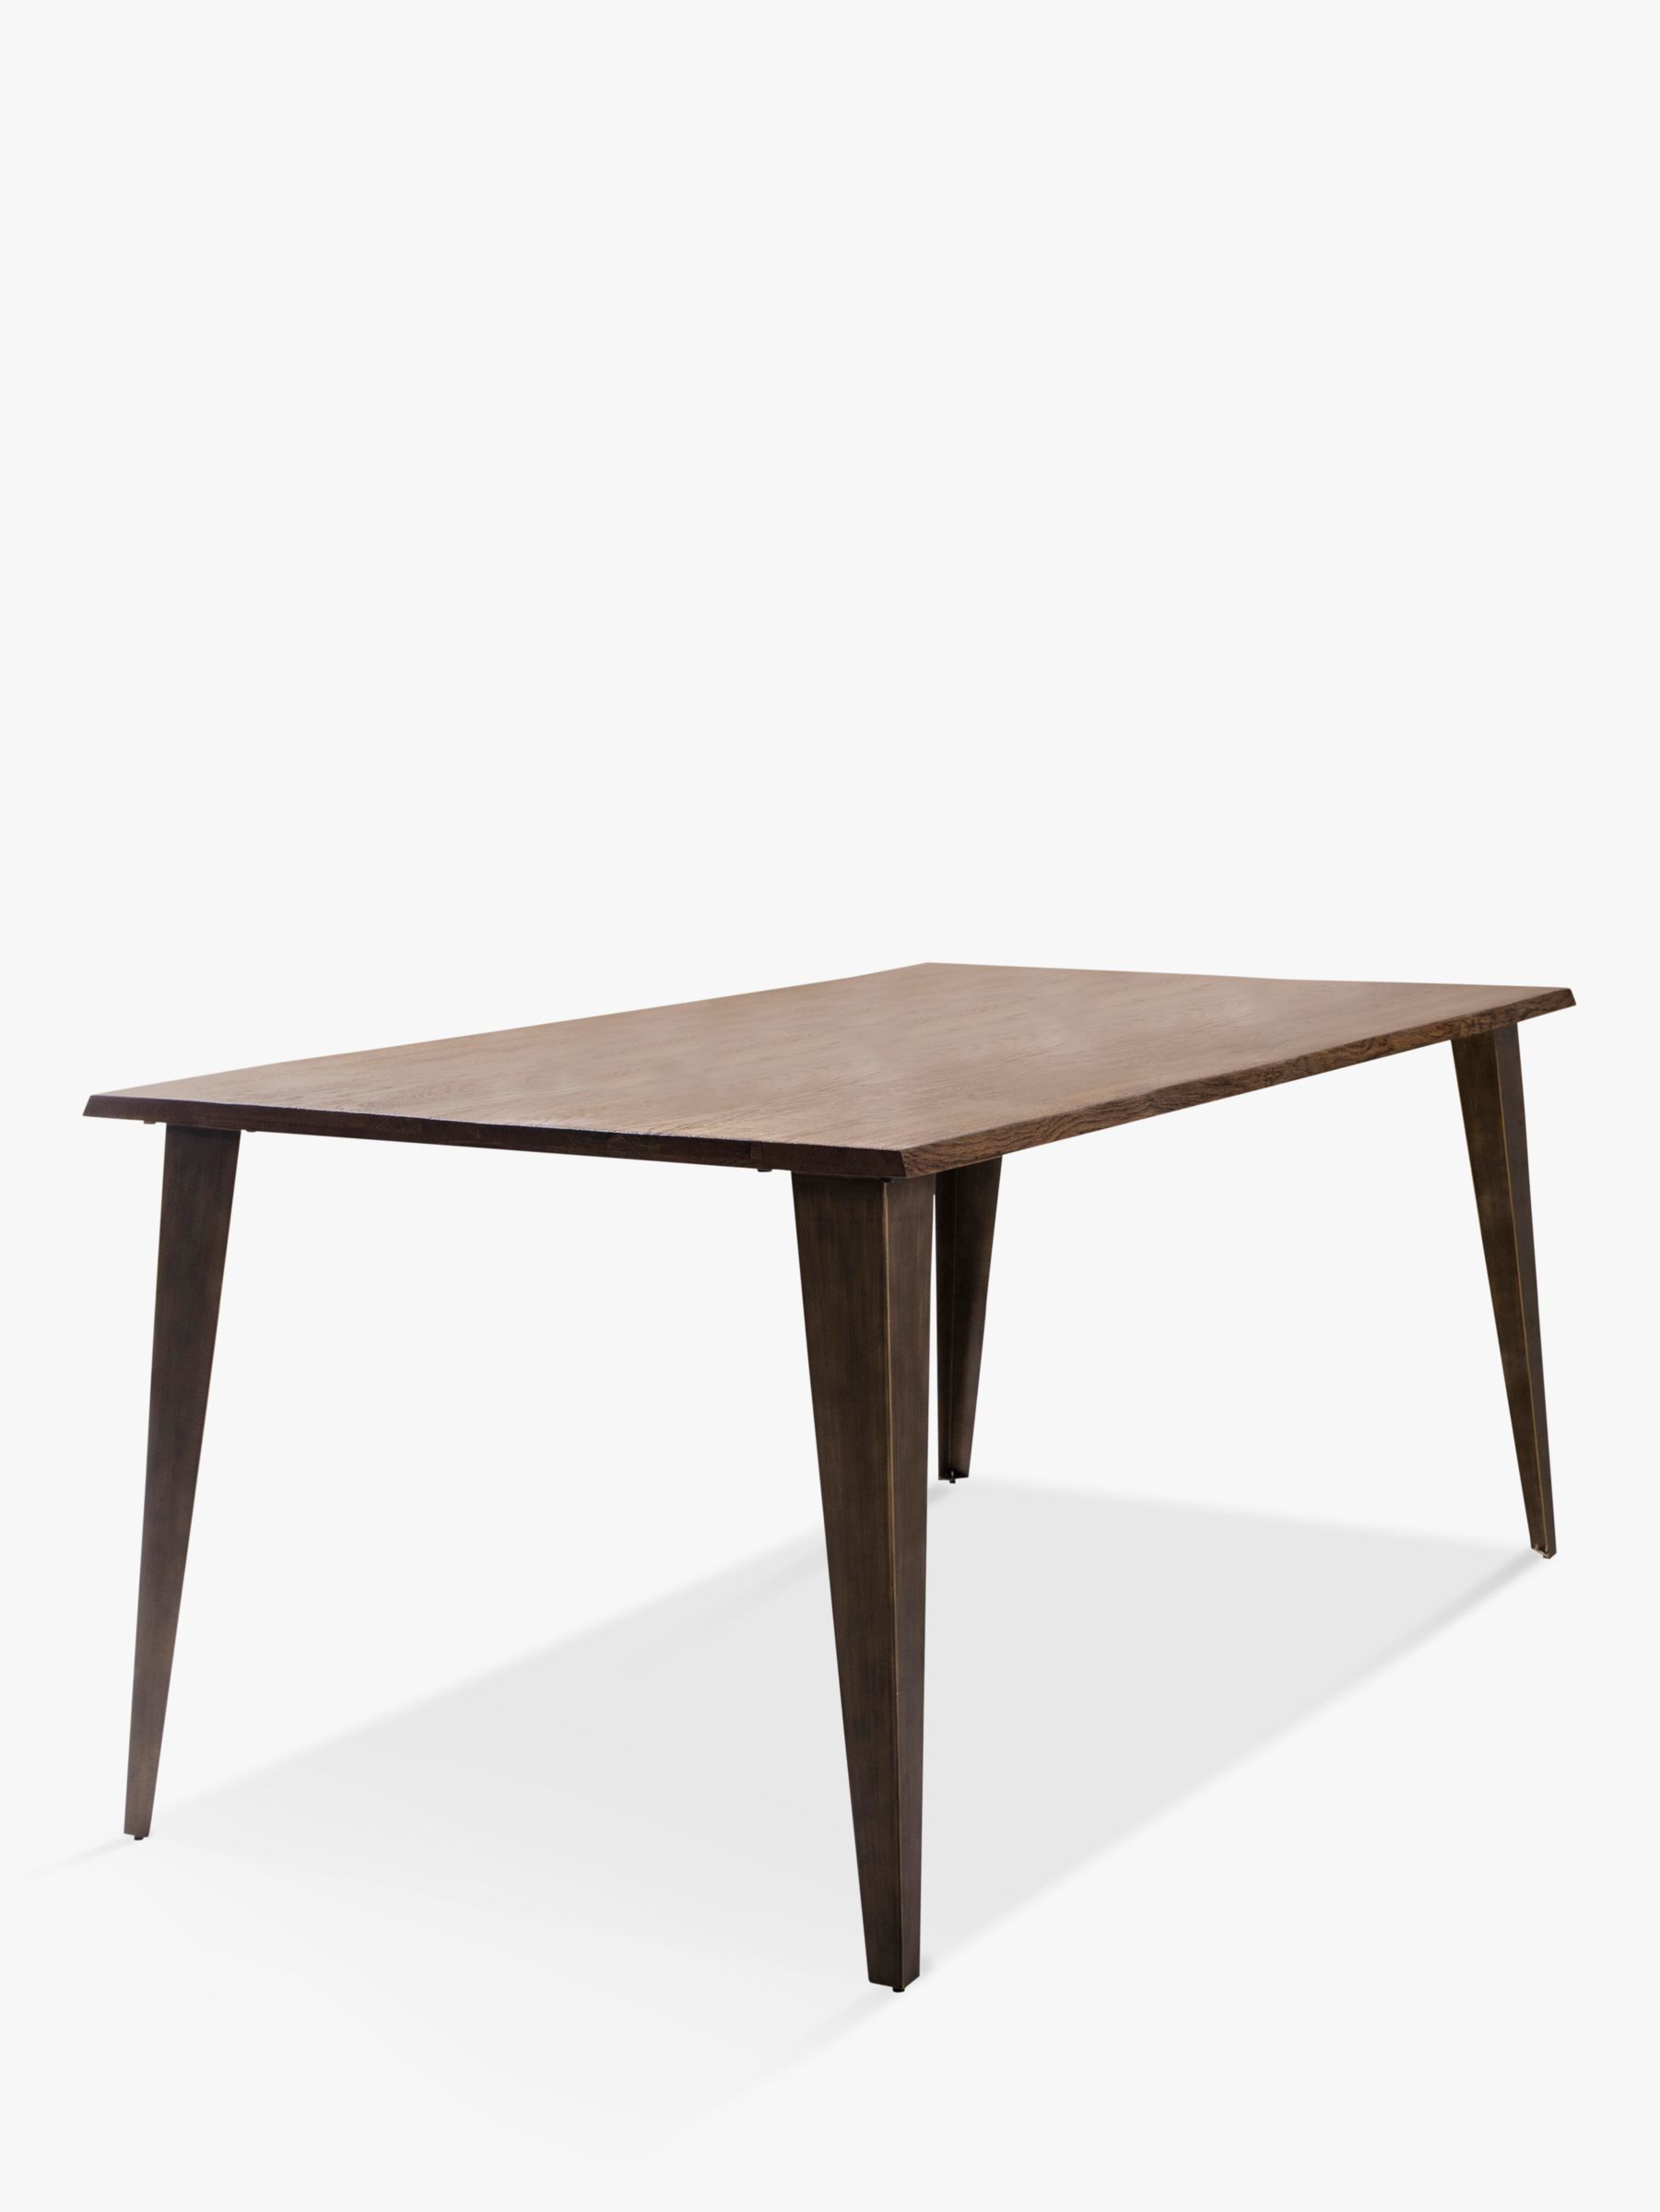 Hudson Living Foundry 6 Seater Dining Table, Smoked Oak at John Lewis ...